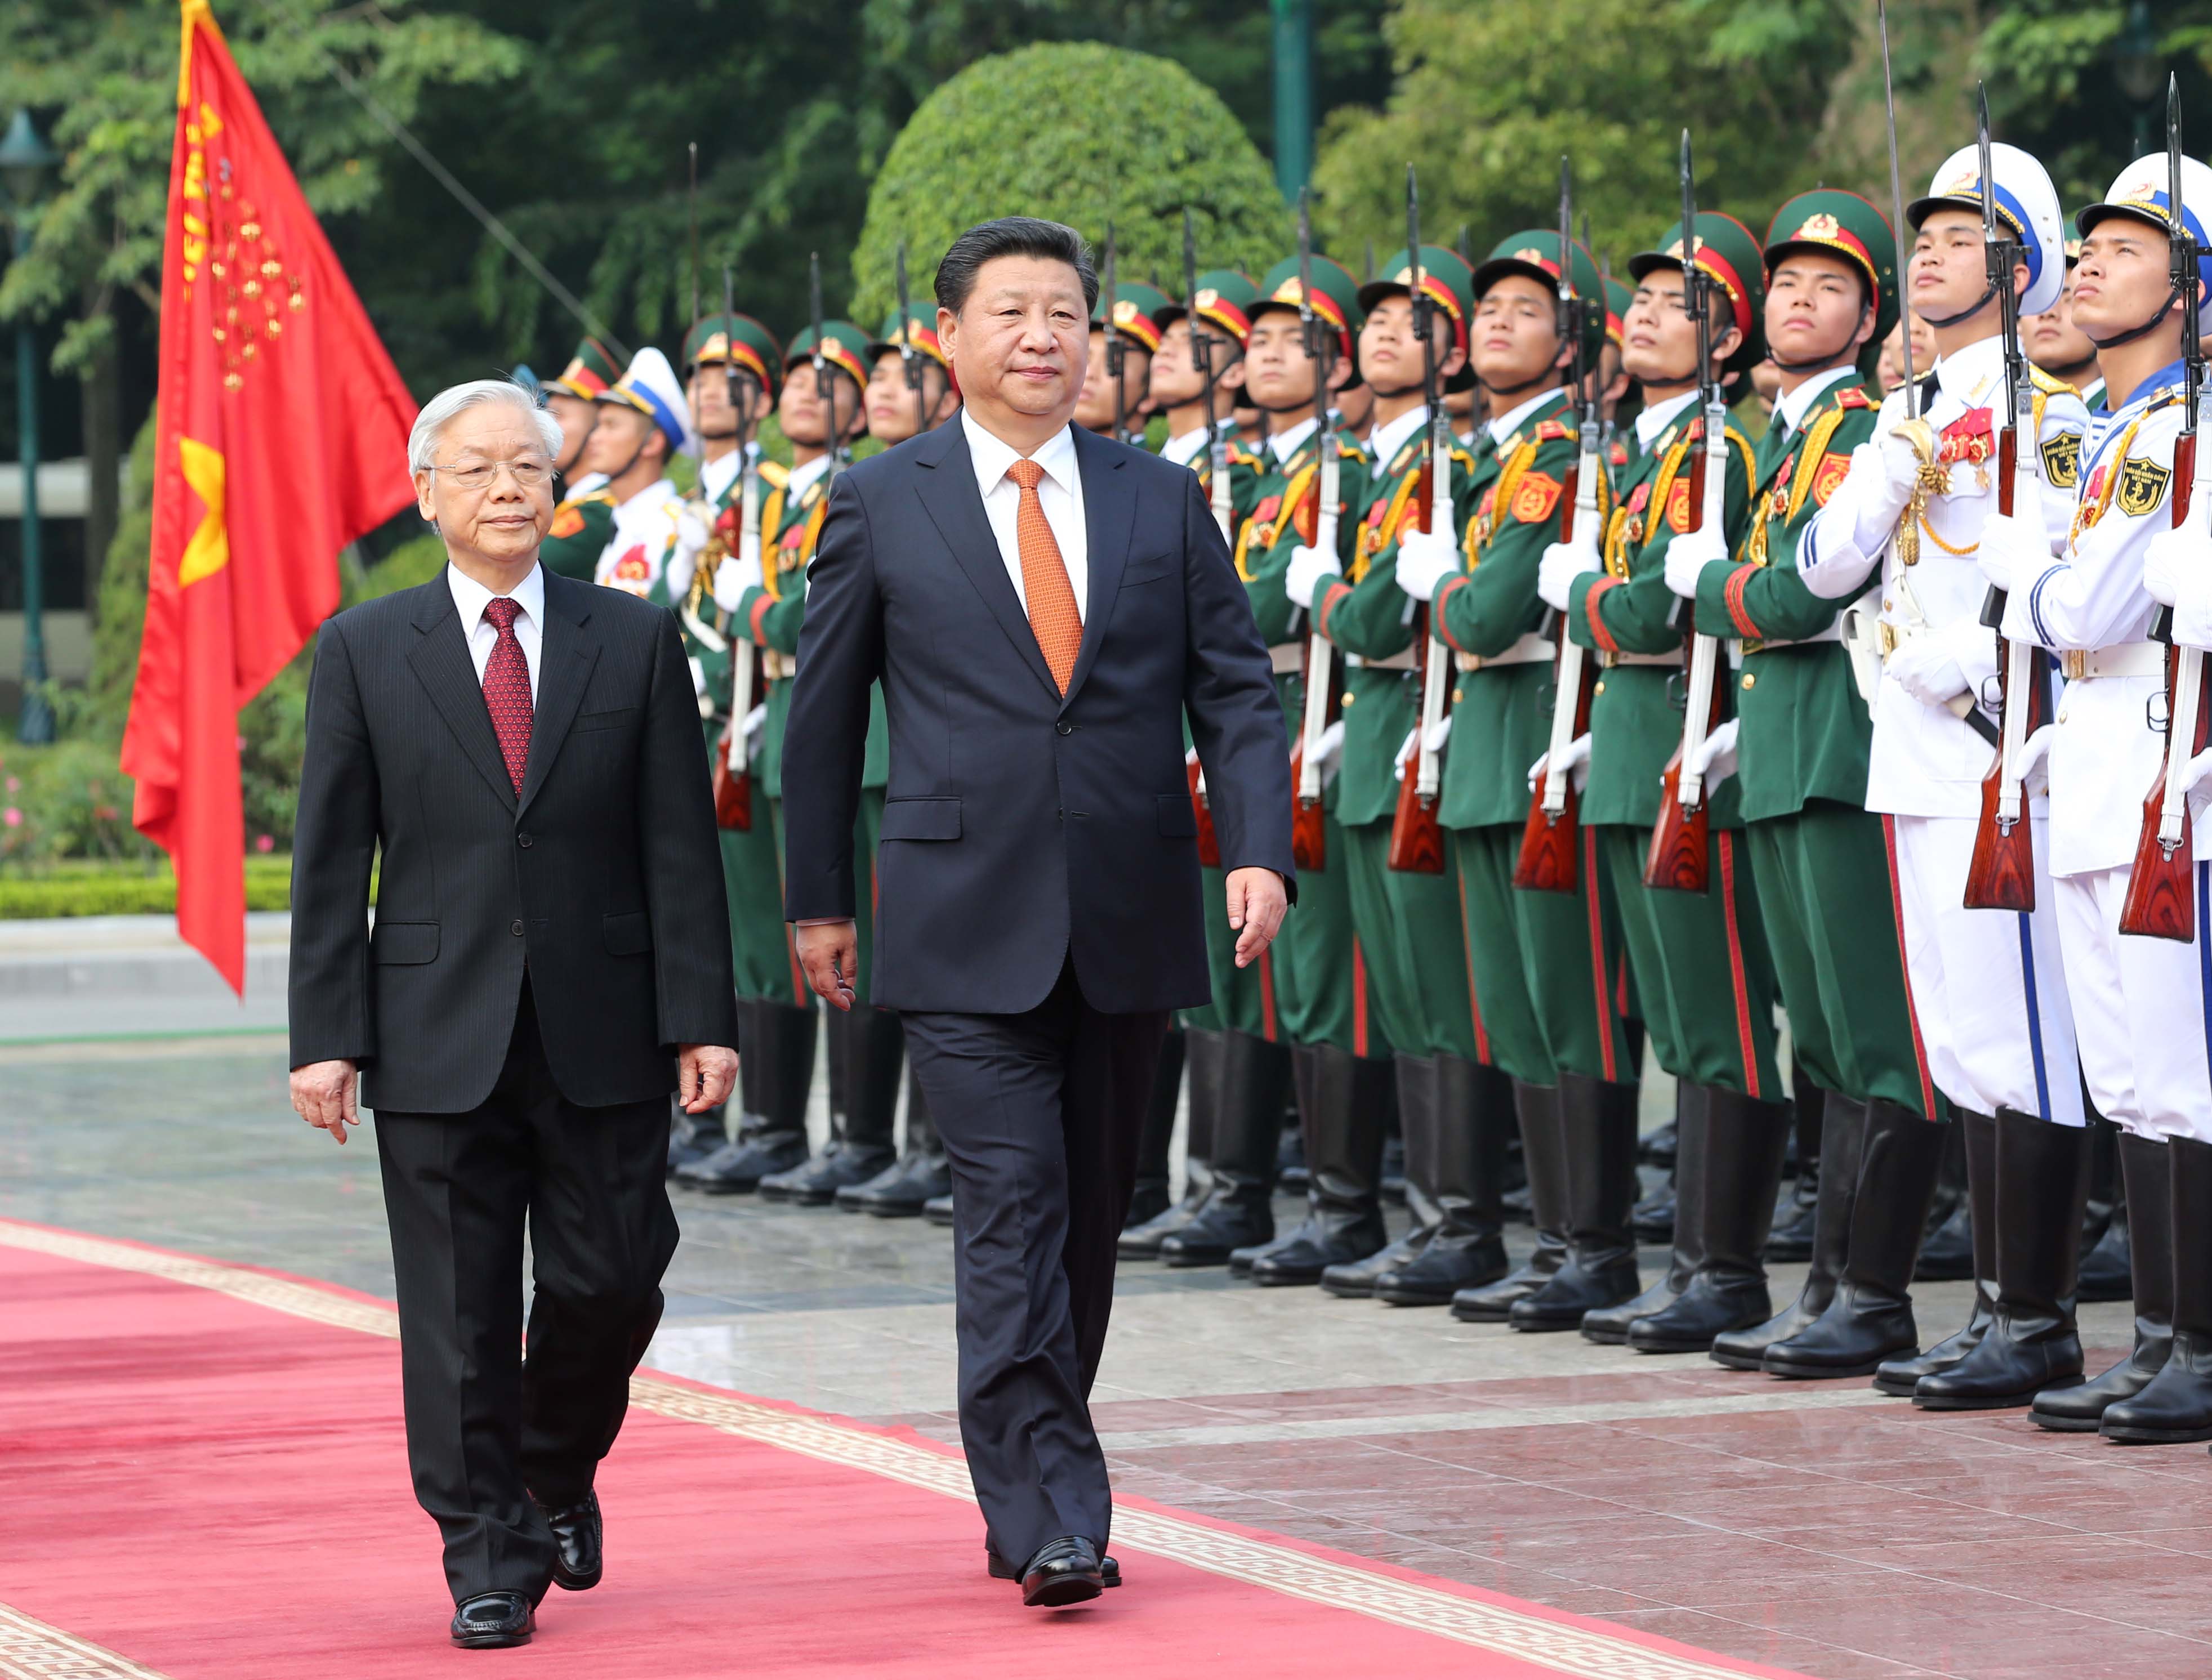 Chinese President Xi Jinping attends a welcoming ceremony held by General Secretary of the Communist Party of Vietnam Nguyen Phu Trong (left) before their talks in Hanoi. Photo: Xinhua